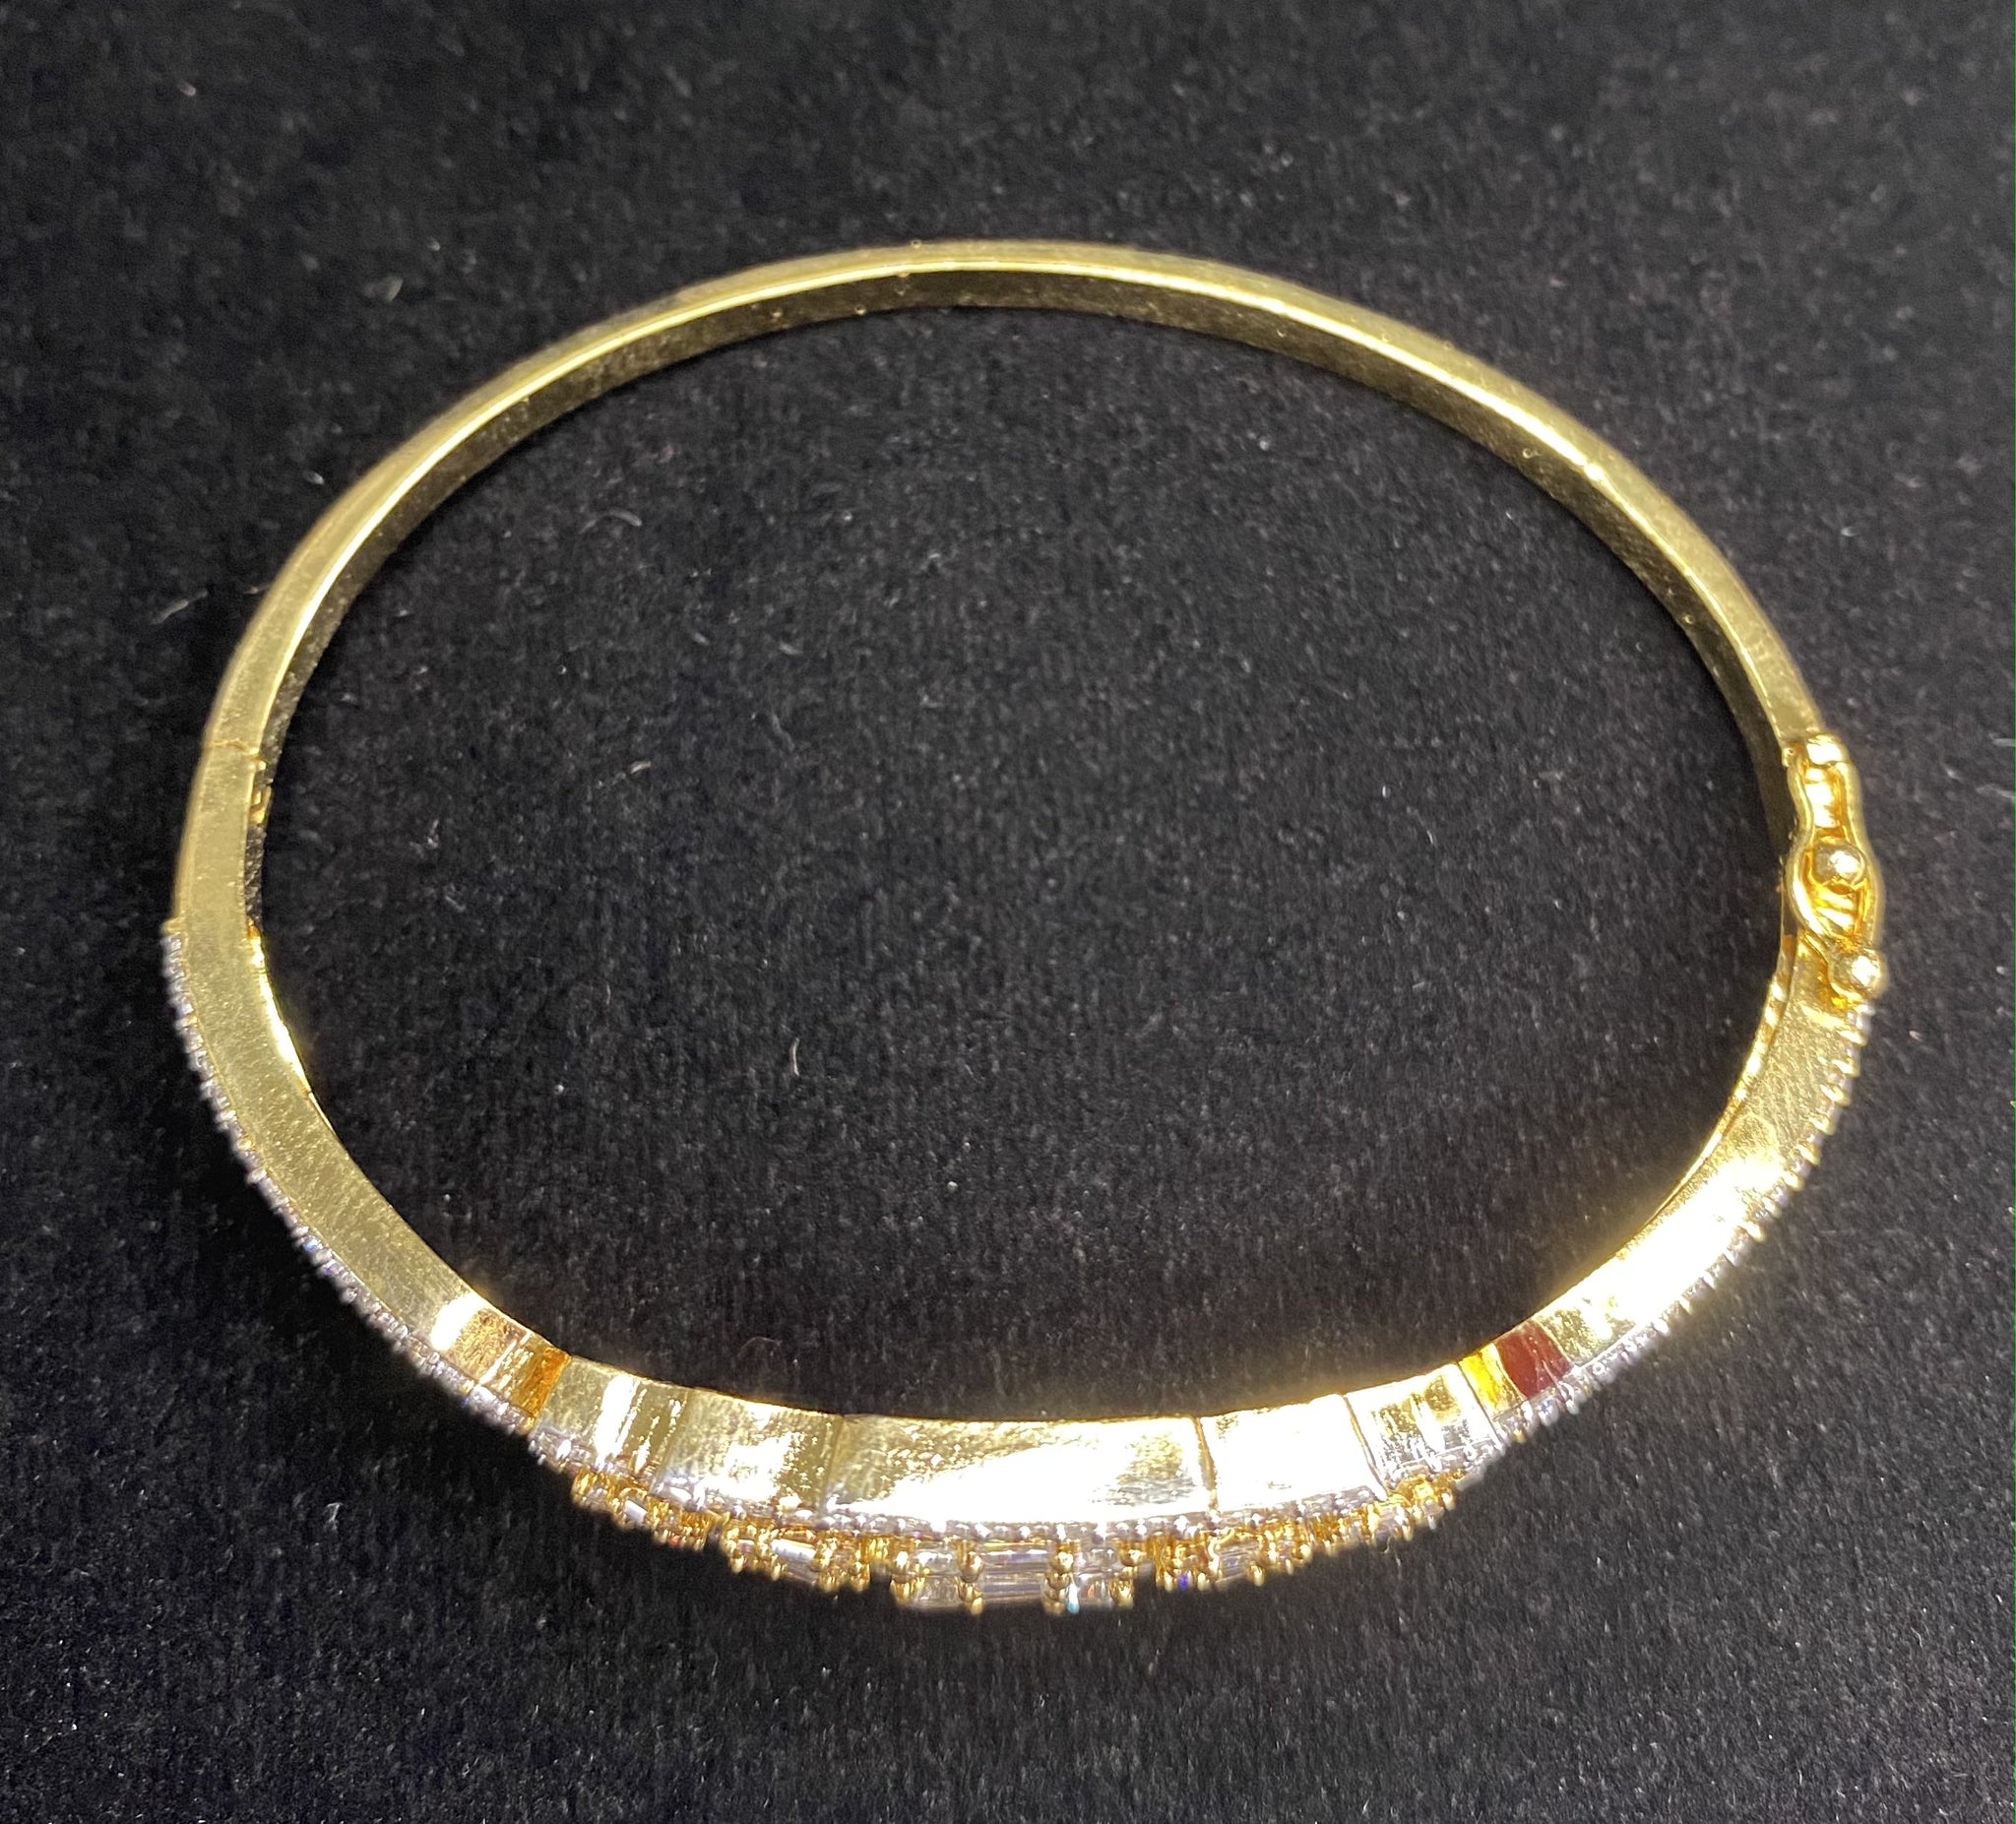  Gold Plated White Clear Stone Bangle Size 2.4 Openable Evening Cocktail Imitation Jewelry Indian Wedding Bridal Necklace Set Bijoux